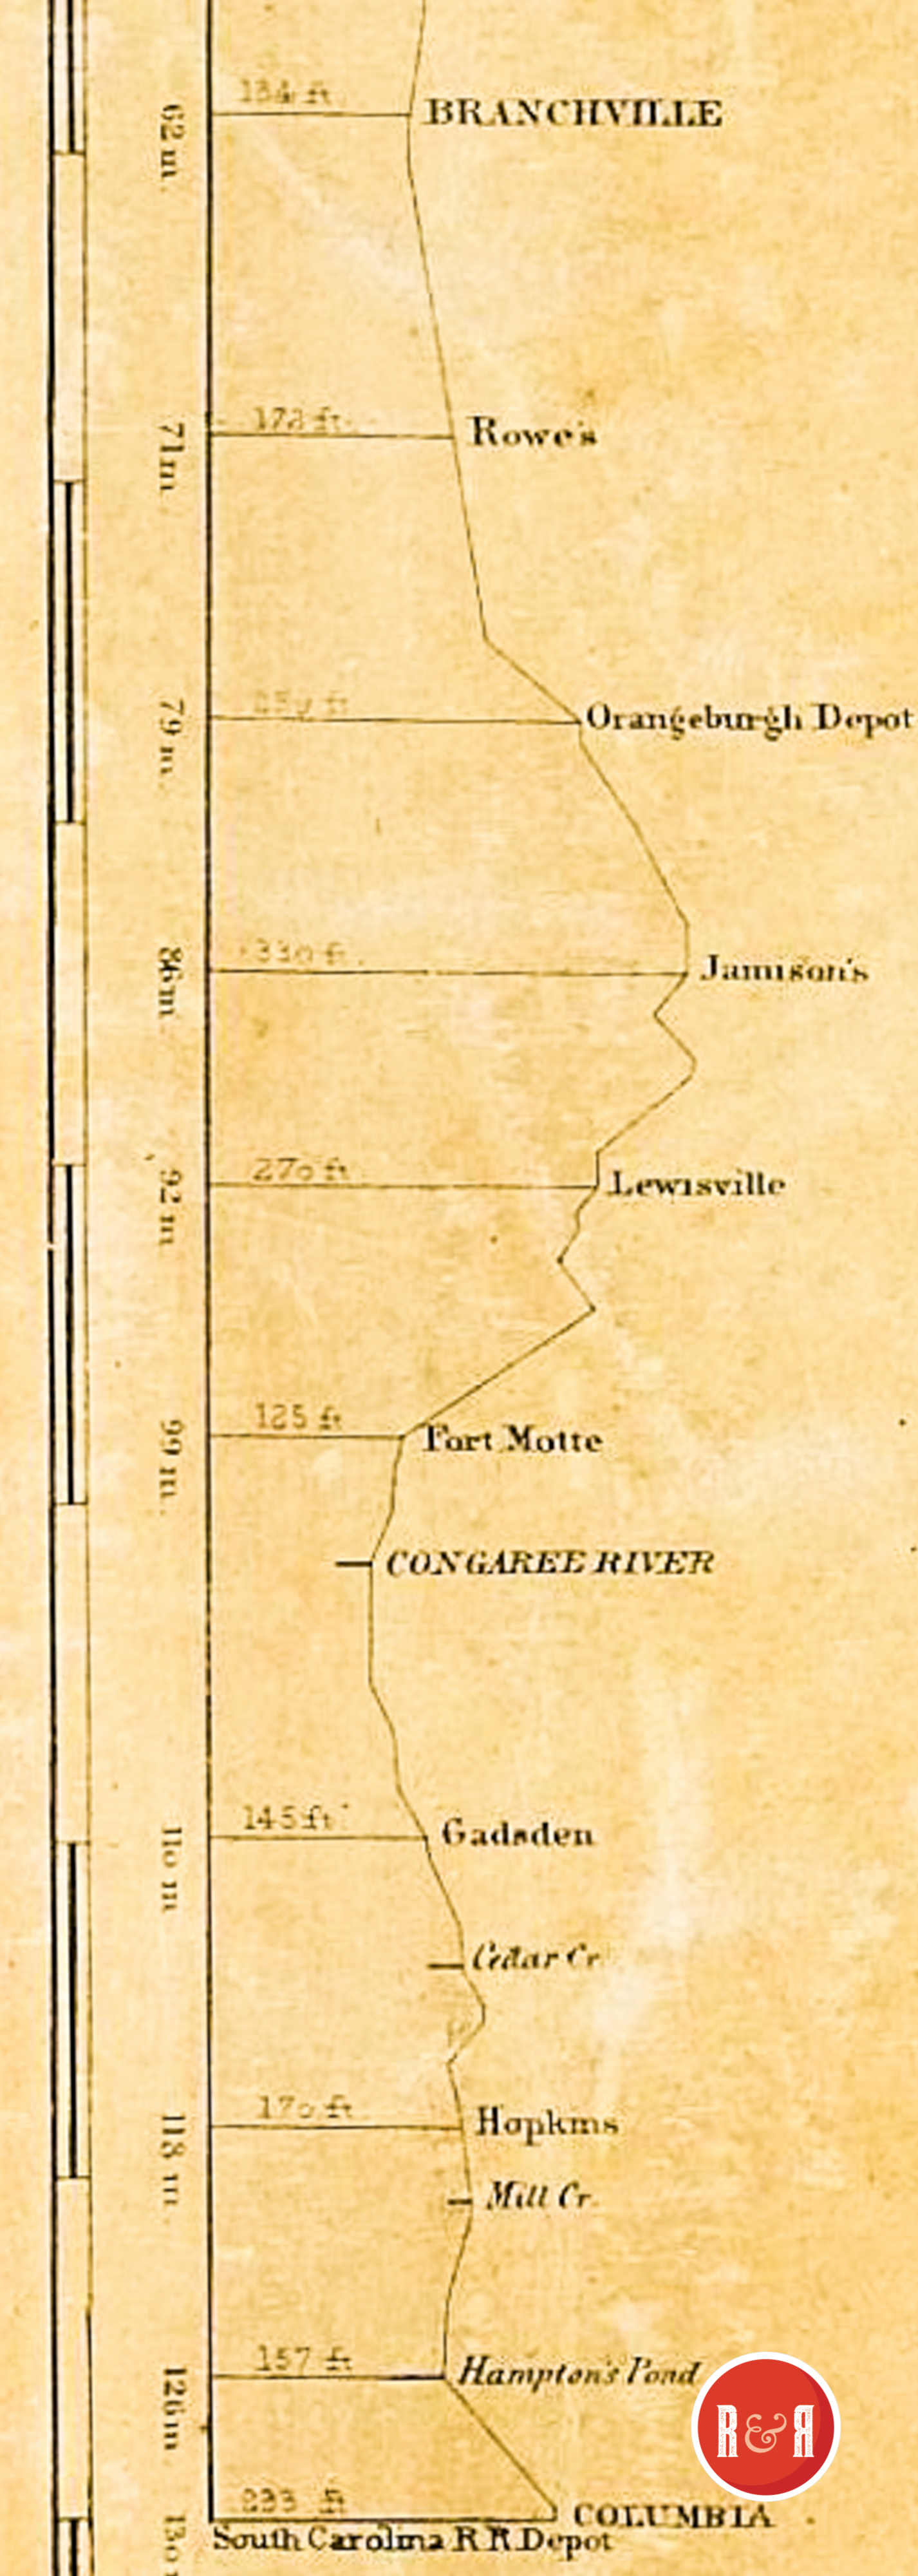 COLTON'S 1854 RAILROAD CHART - FROM BRANCHVILLE TO COLUMBIA